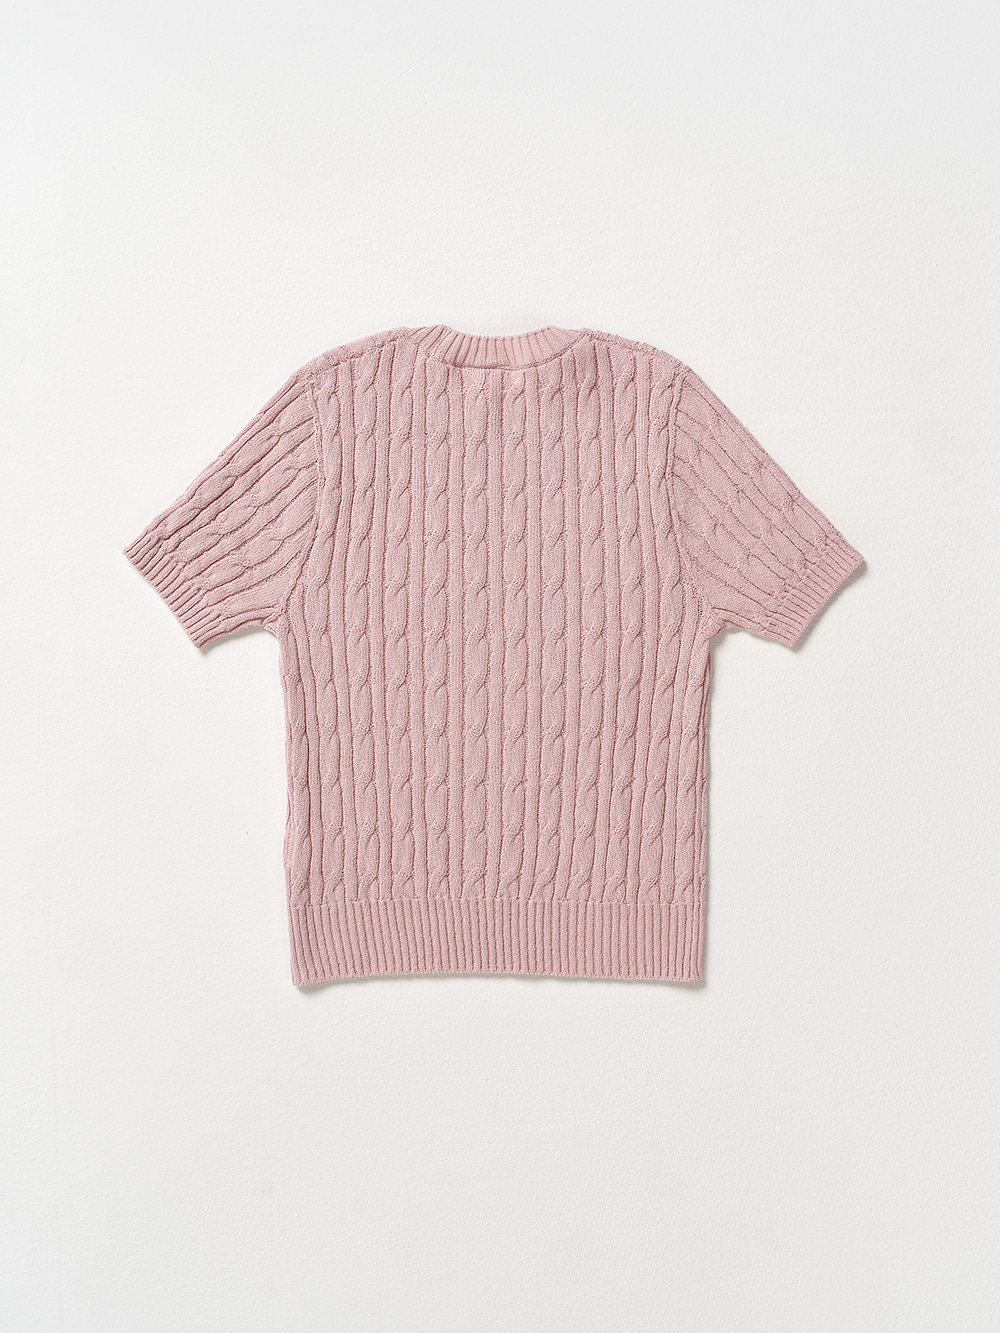 Half Sleeve Cable Knit_Pink